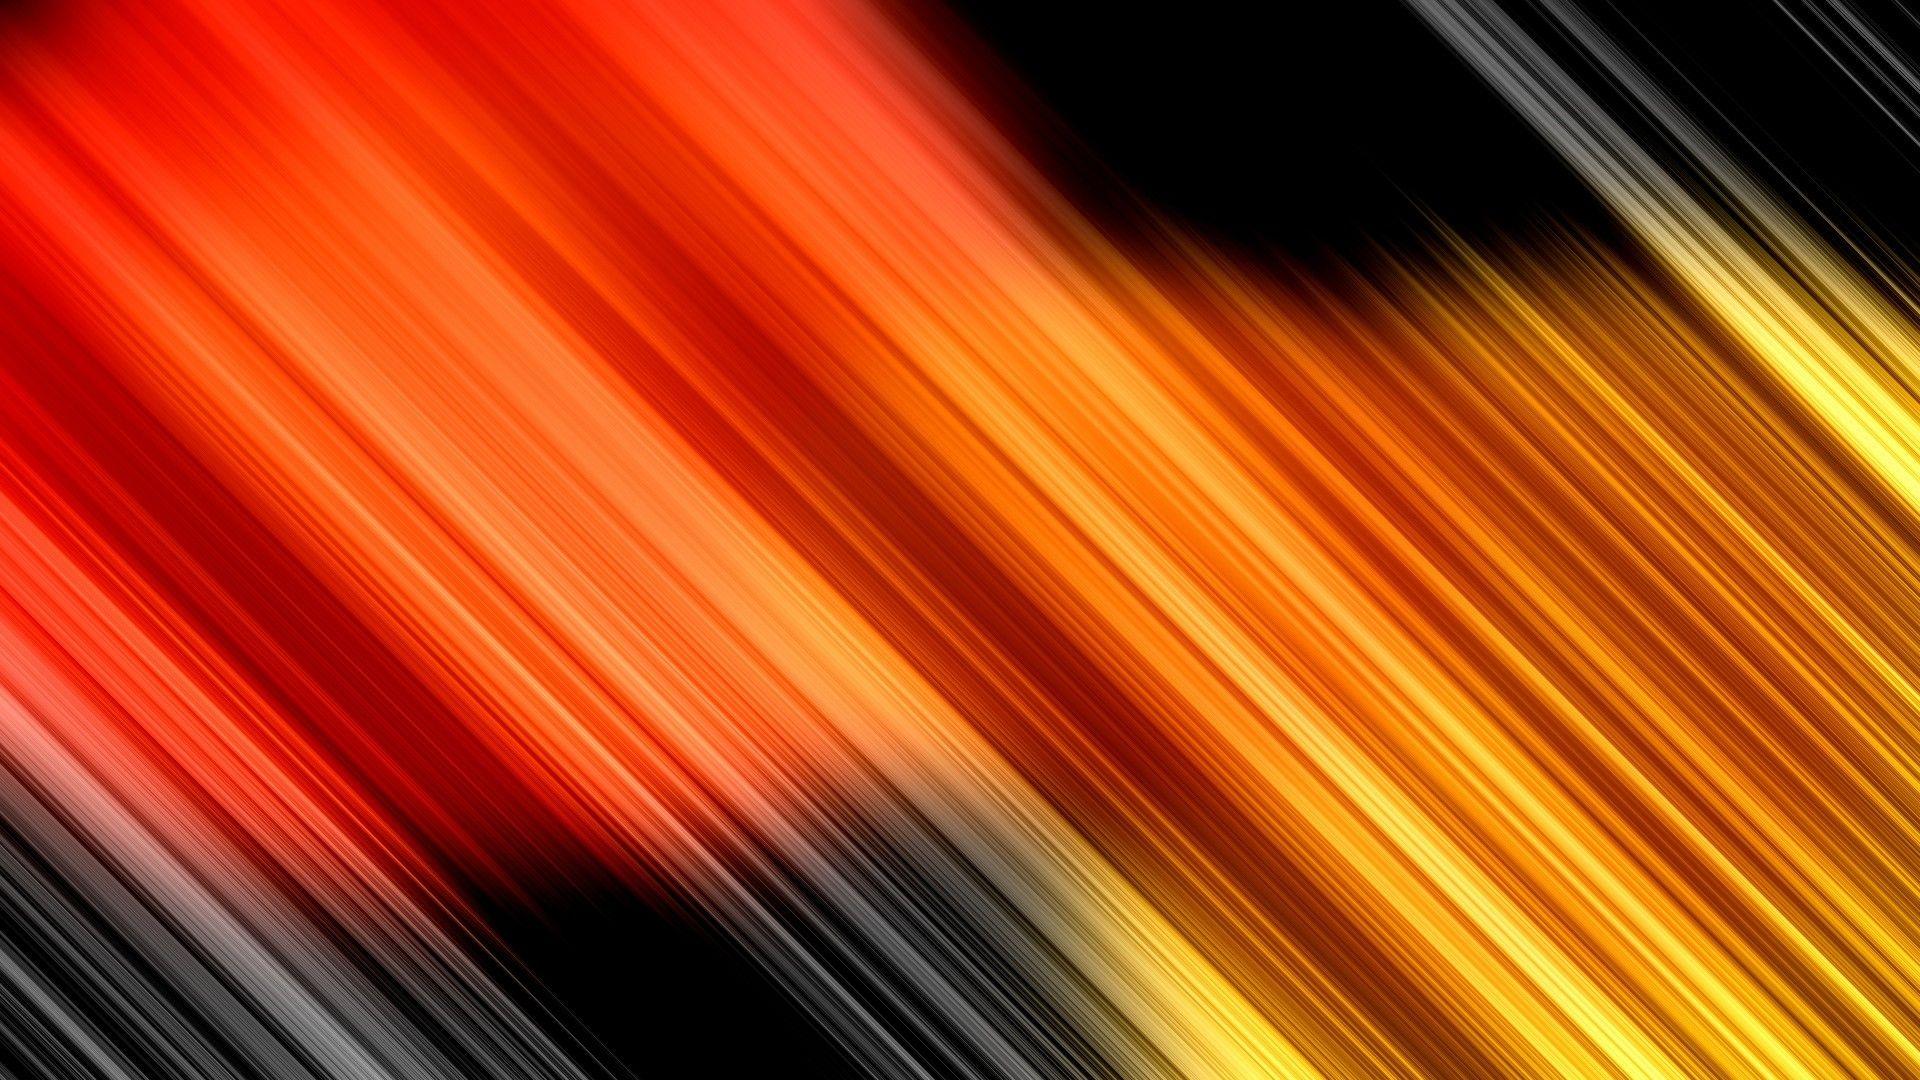 Red and Yellow Wallpaper  Free Stock Photo